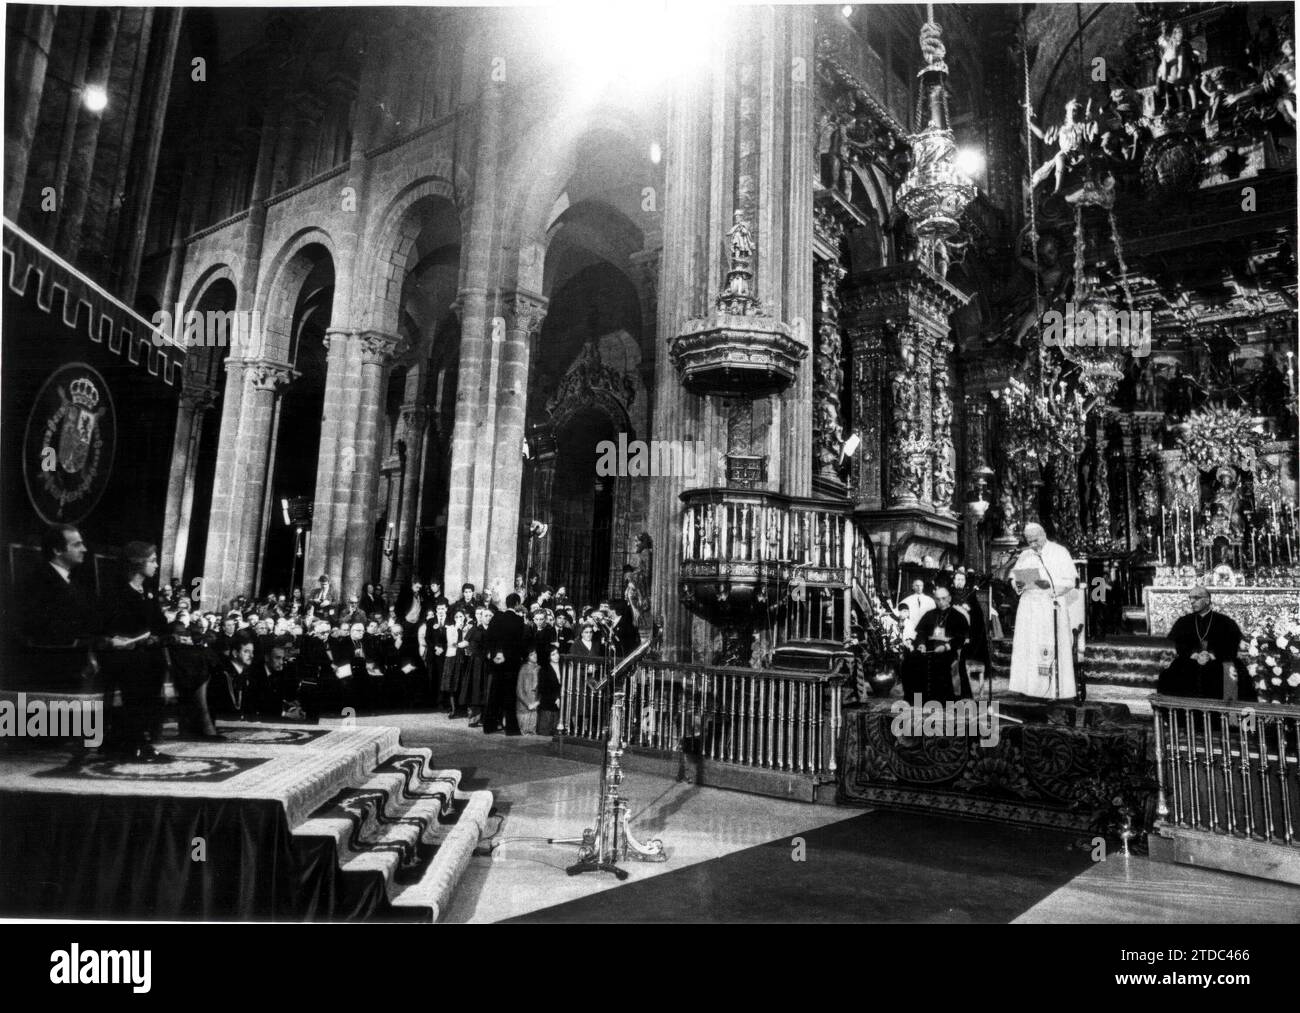 Santiago de Compostela, 11/9/1982.- In the Cathedral of the Apostle, pro-European act. In his speech, John Paul II spoke of the Christian roots of Europe and its necessary spiritual and human renewal. Prayer before the tomb of Santiago. Credit: Album / Archivo ABC Stock Photo